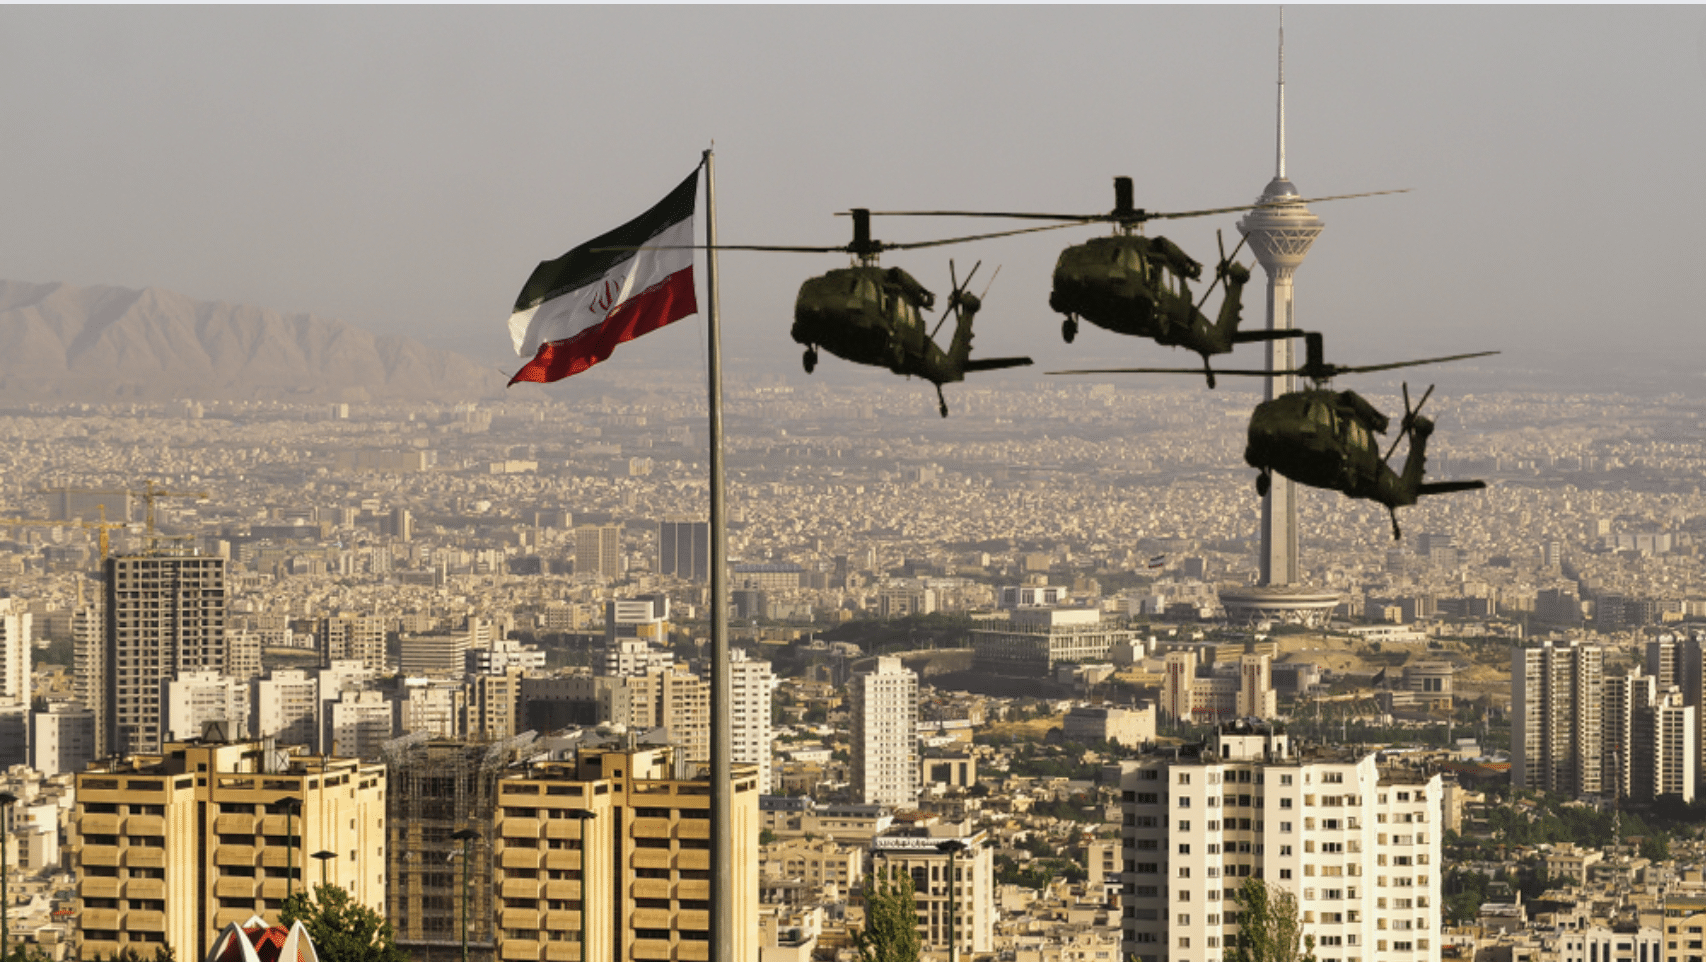 Iran enters massive war games with 200 attack helicopters & missiles as tensions escalate with America and israel